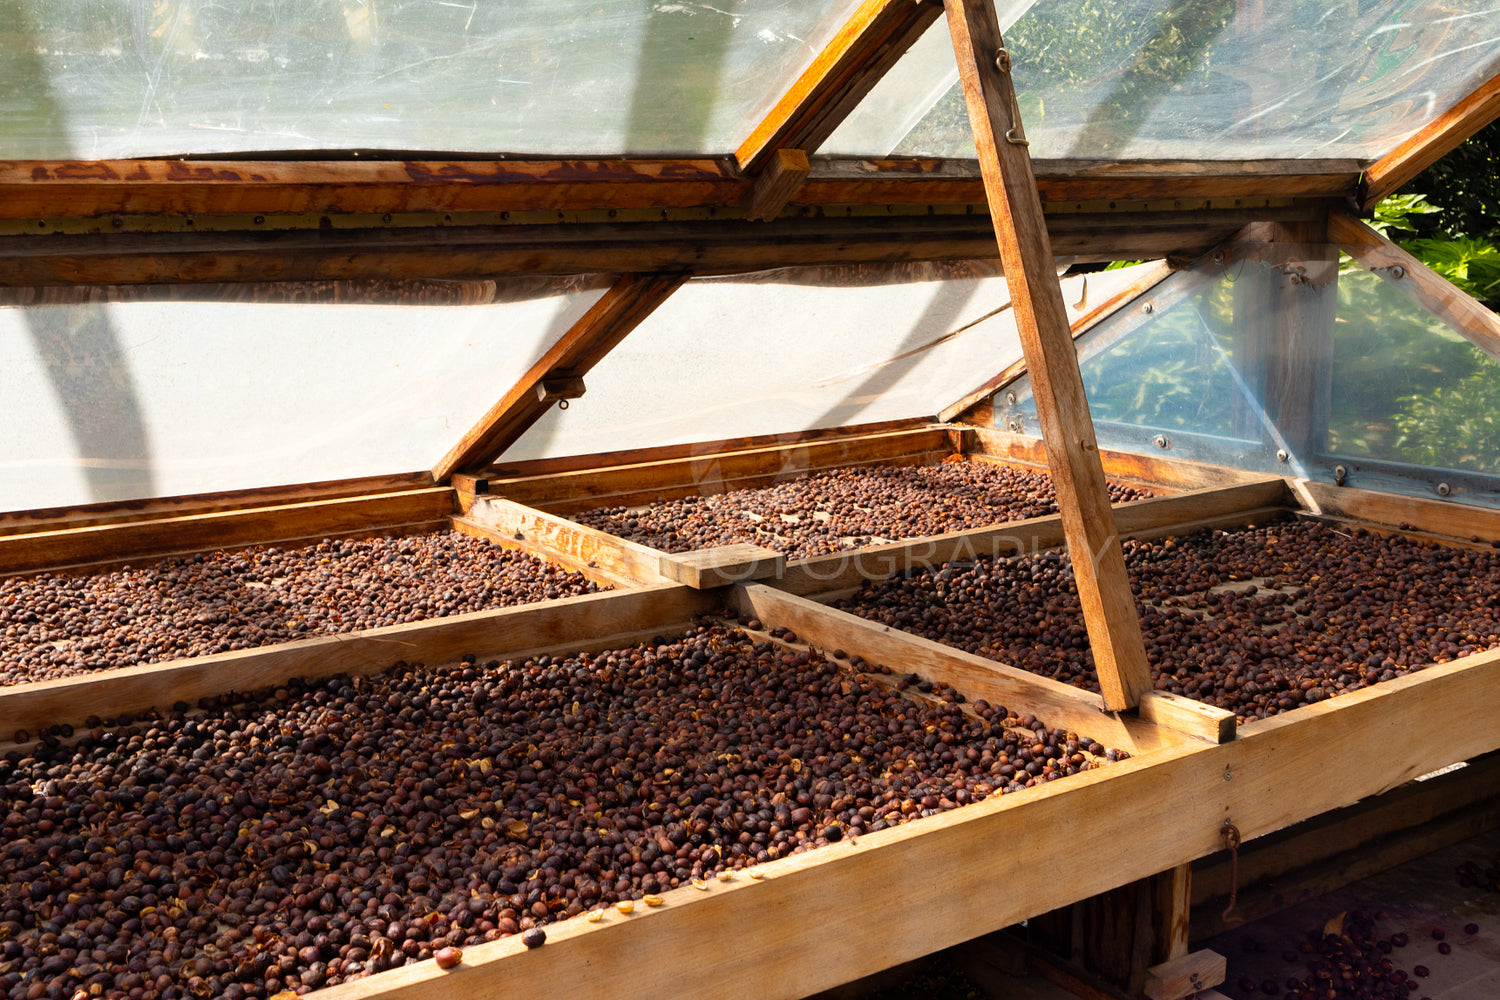 Organic Raw Coffee Beans Drying In Wooden Crate